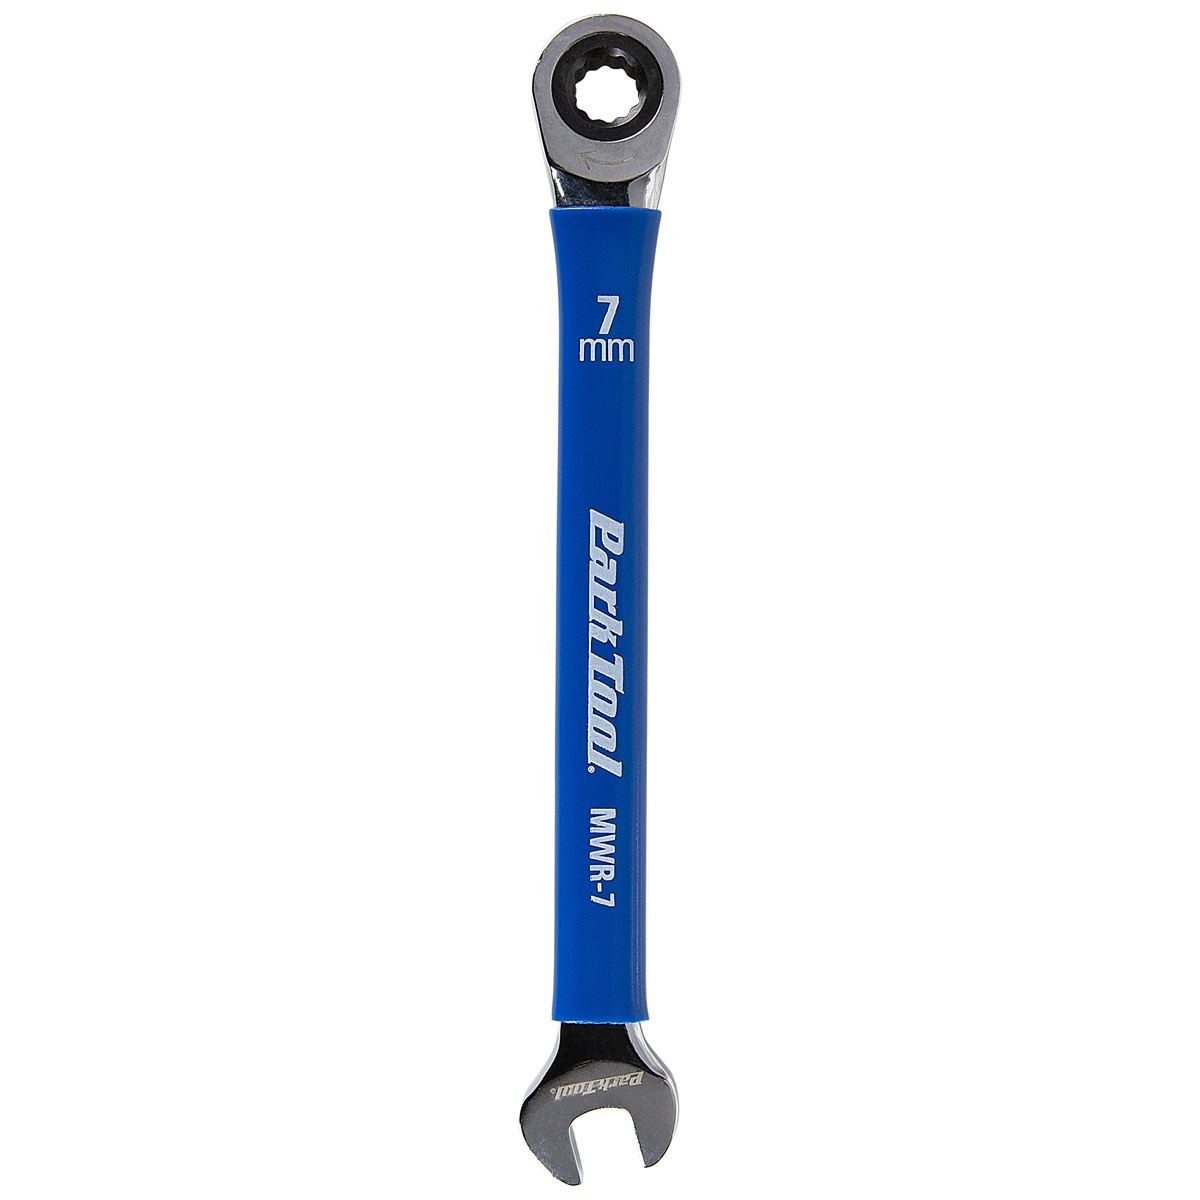 Park Tool Combination ratchet wrench MWR-7 7 mm